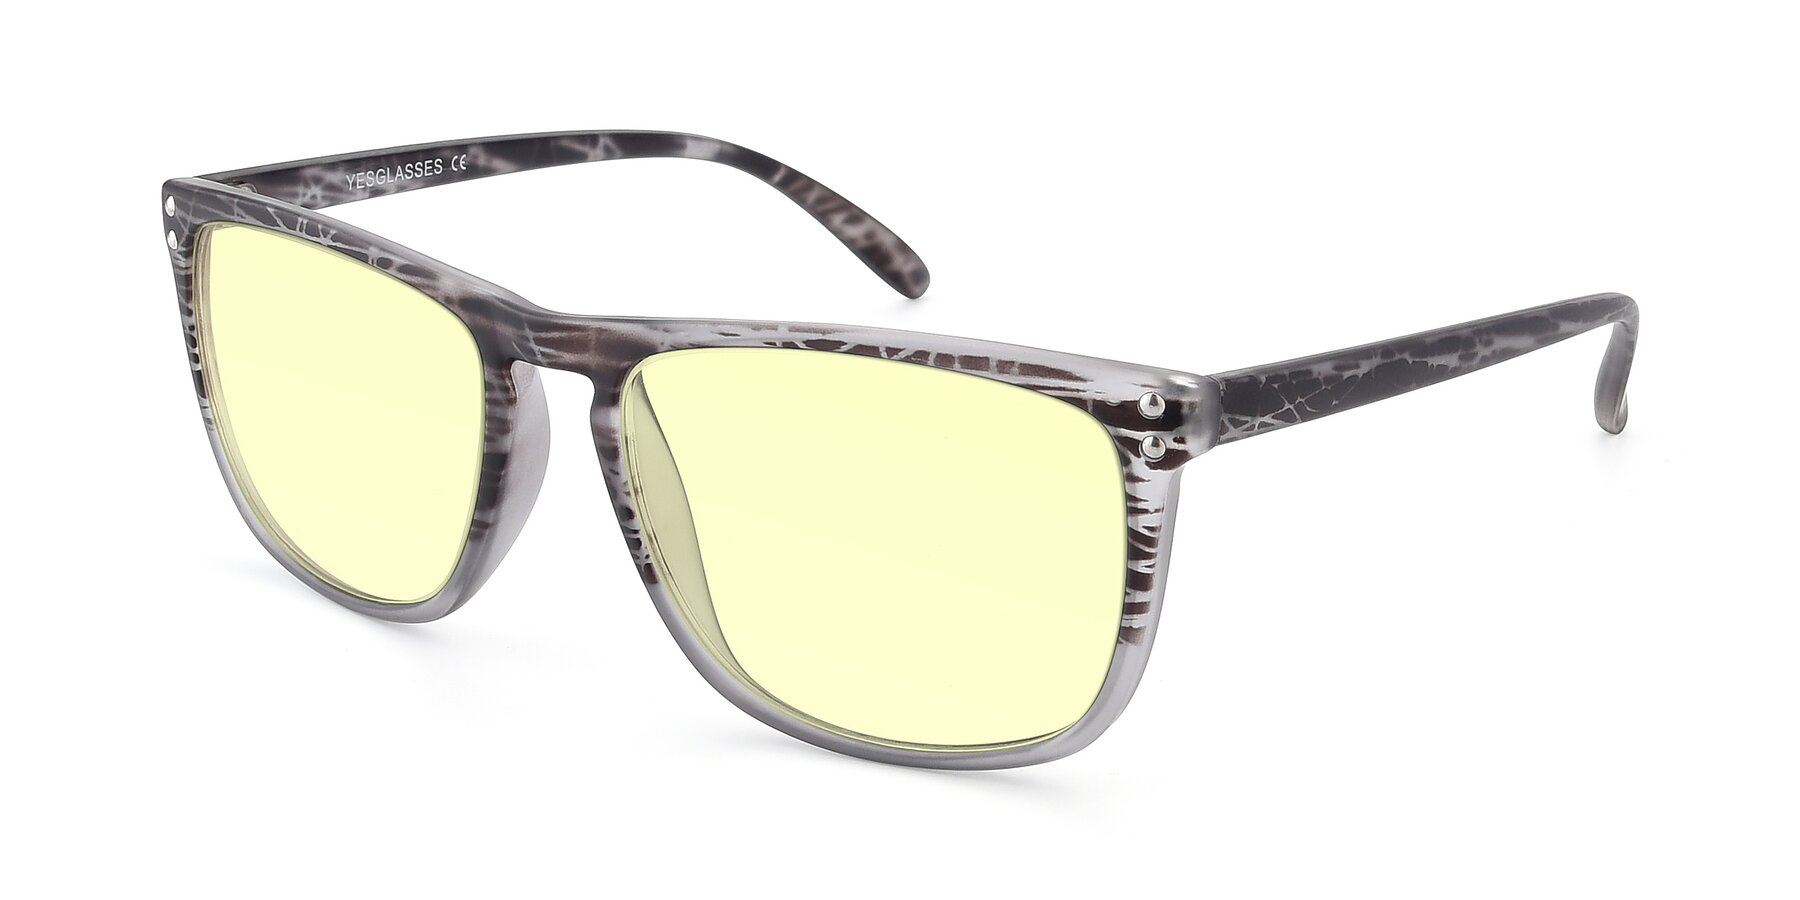 Angle of SSR411 in Translucent Floral Grey with Light Yellow Tinted Lenses